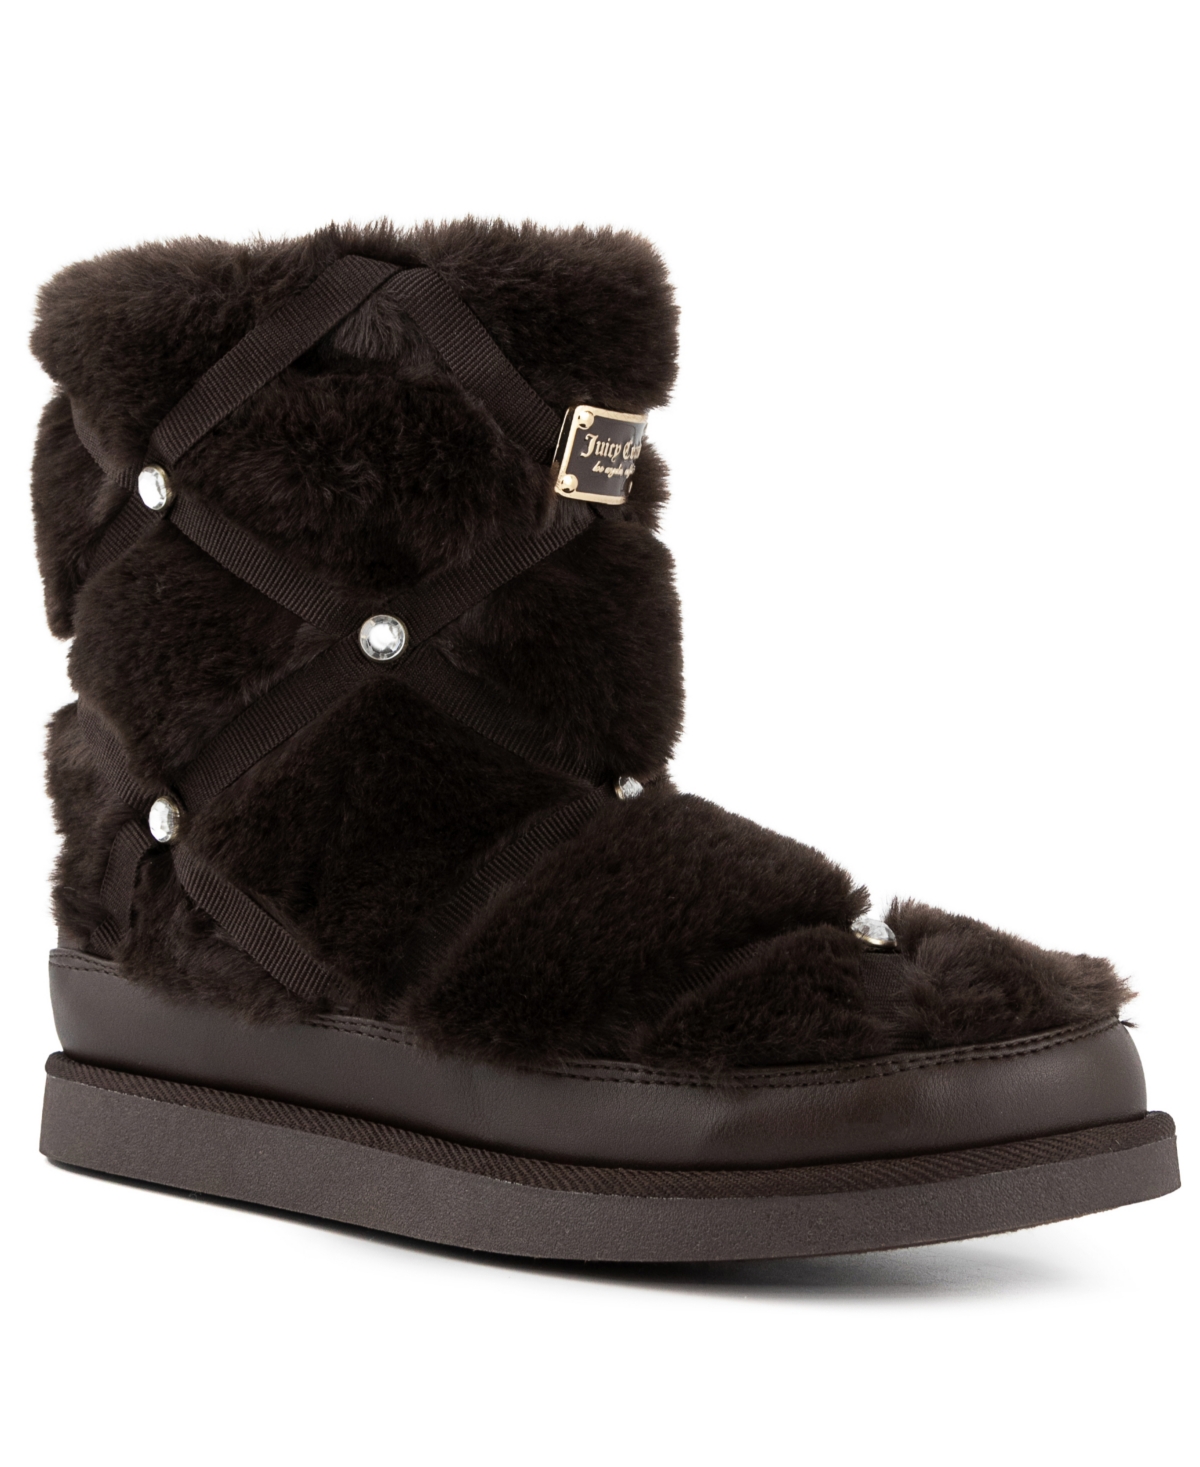 Women's Knockout Winter Booties - Brown